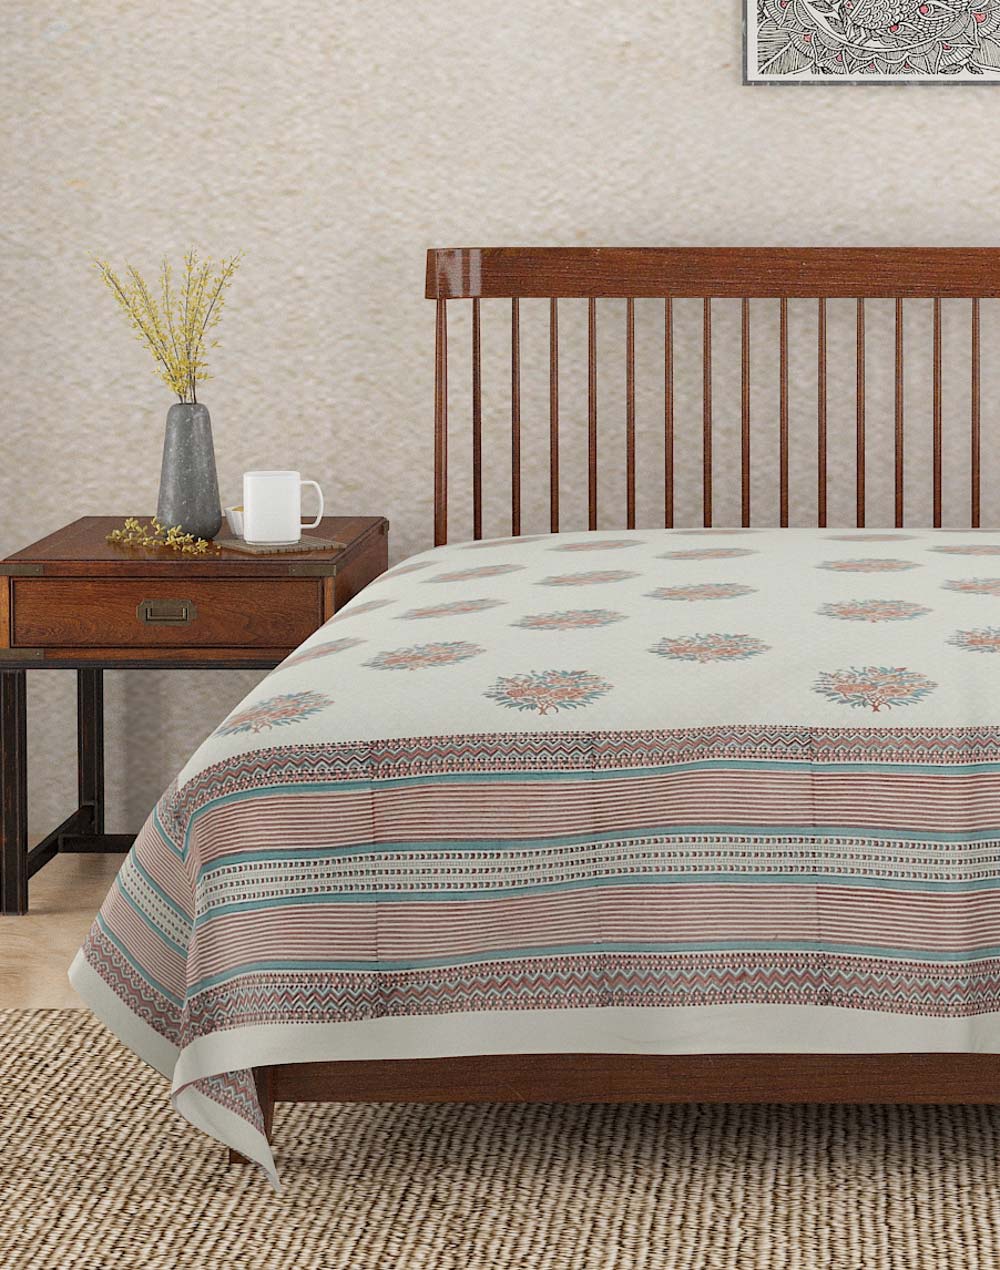 Cotton Palampur Printed Bed Cover - King